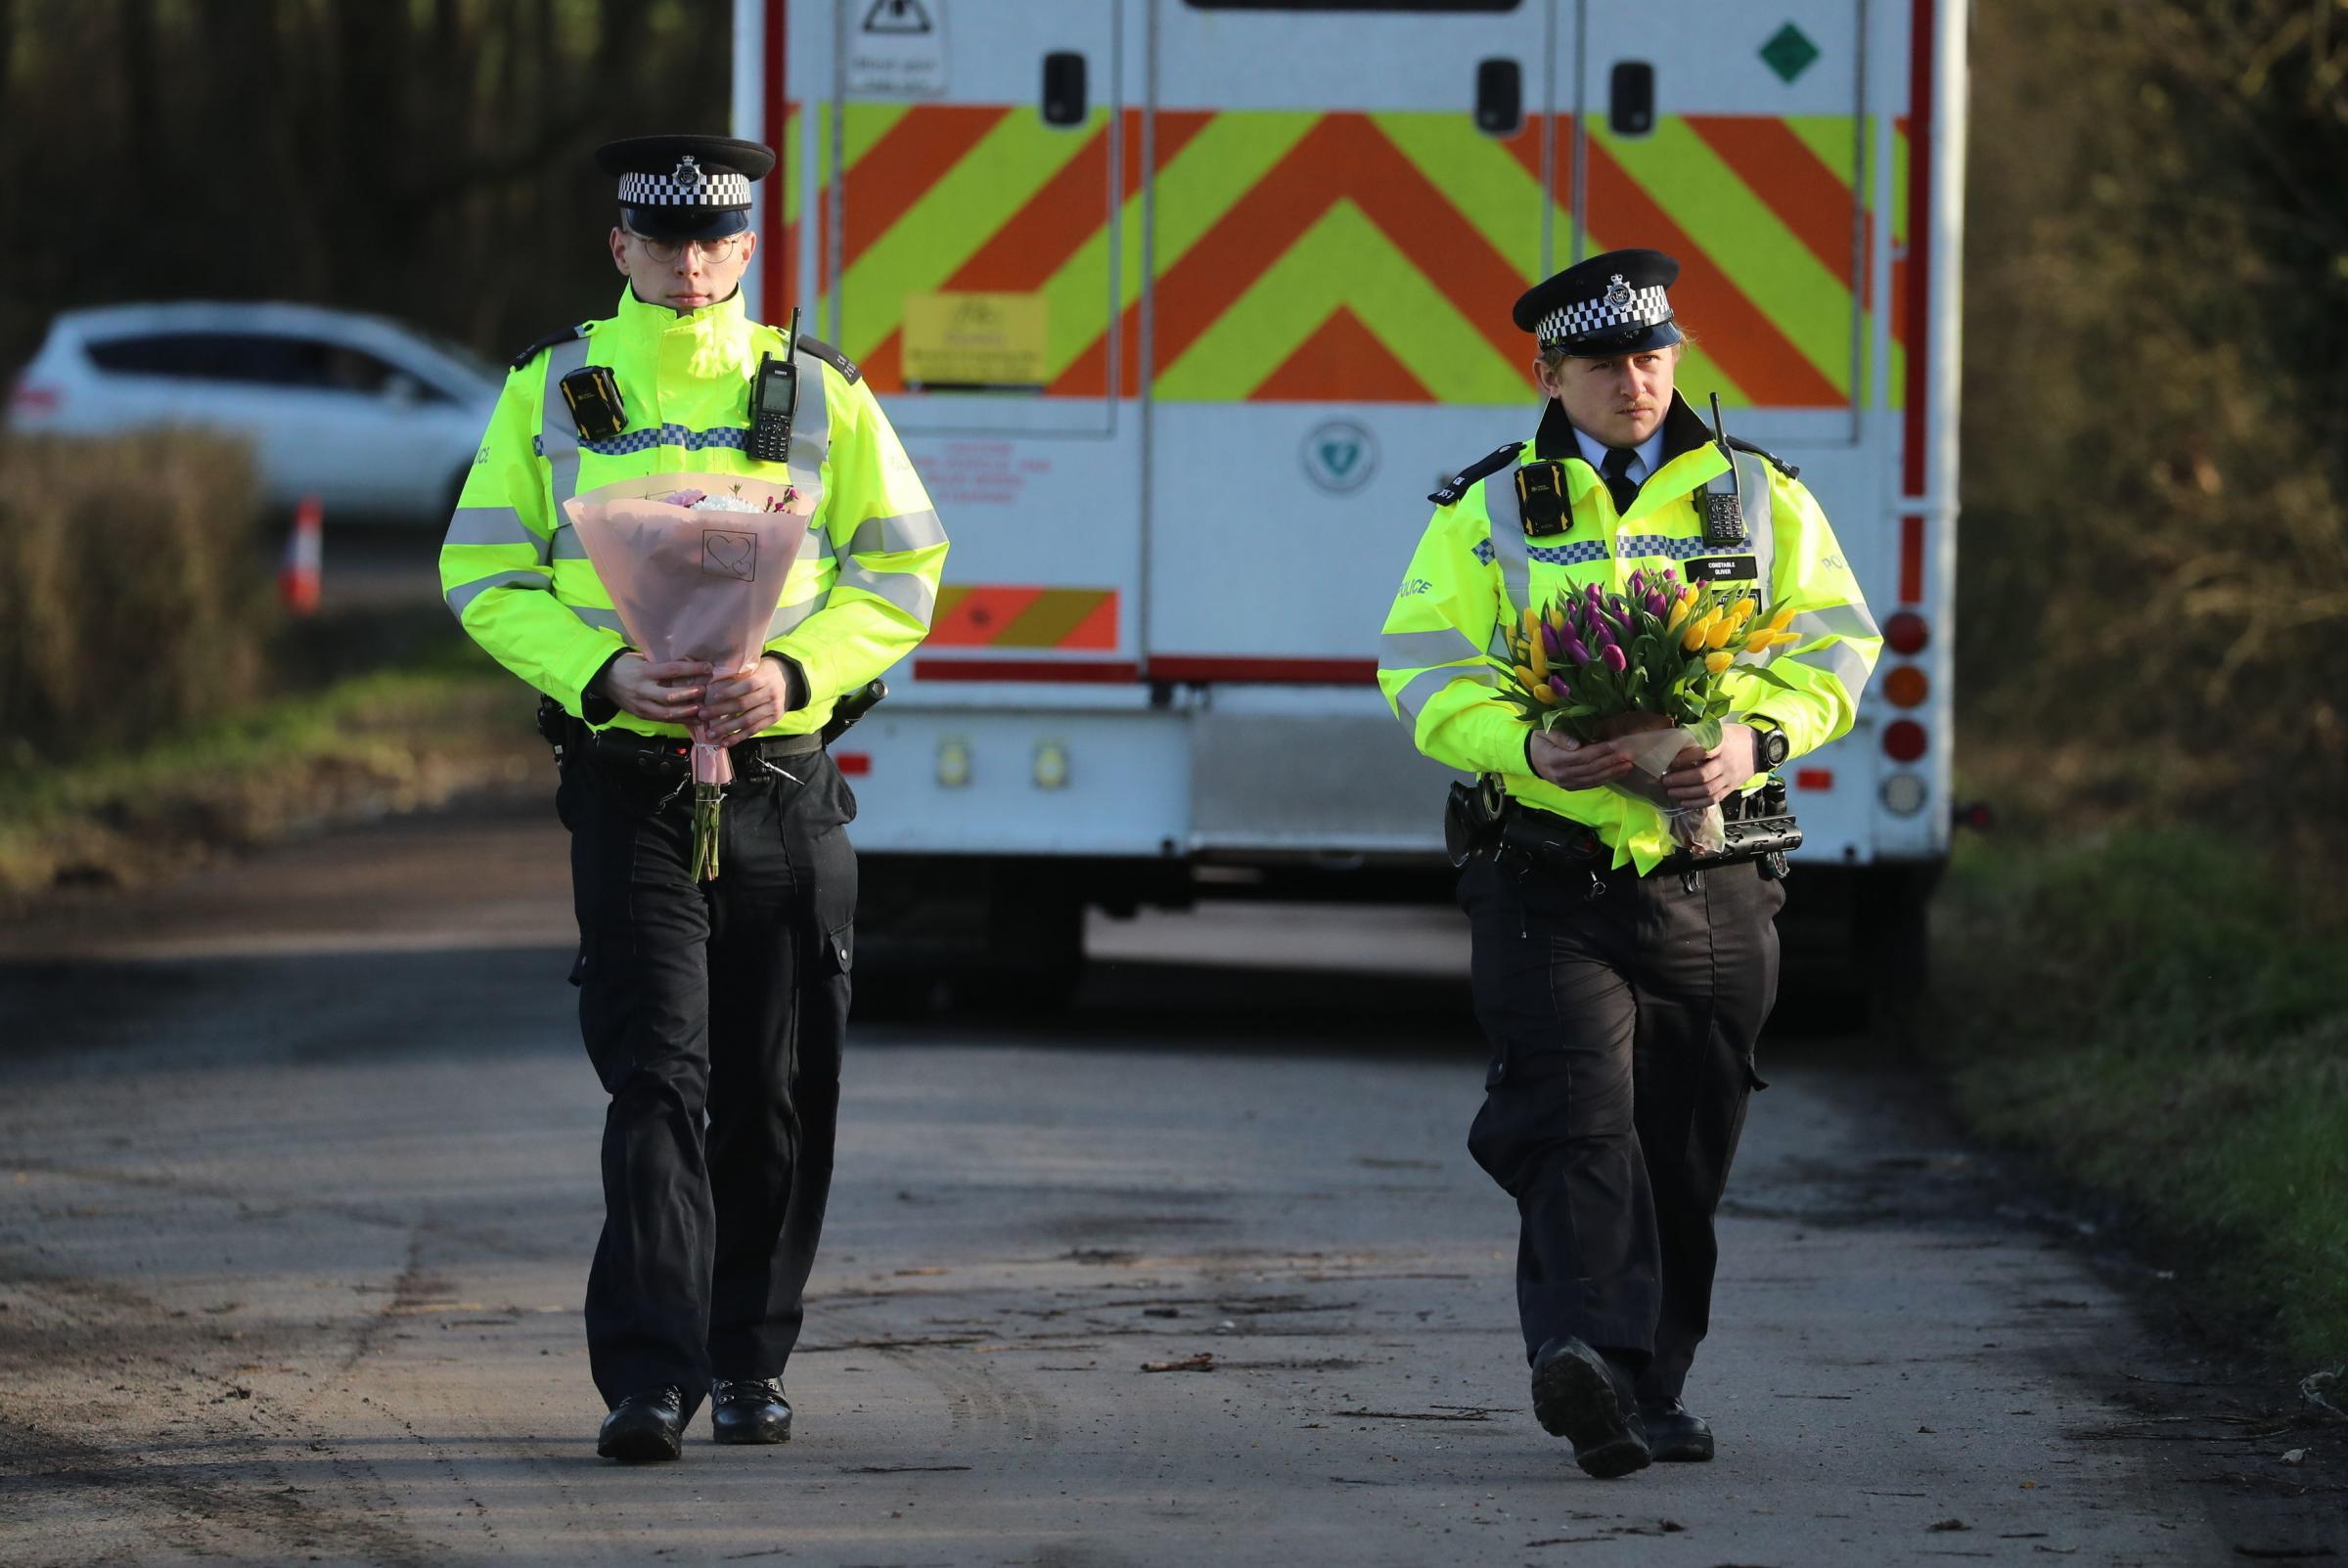 Police officers carry flowers brought by members of the public to the entrance of Great Chart Golf and Leisure in Ashford in Kent, after detectives confirmed that human remains found nearby are those of missing woman Sarah Everard. Picture date: Friday